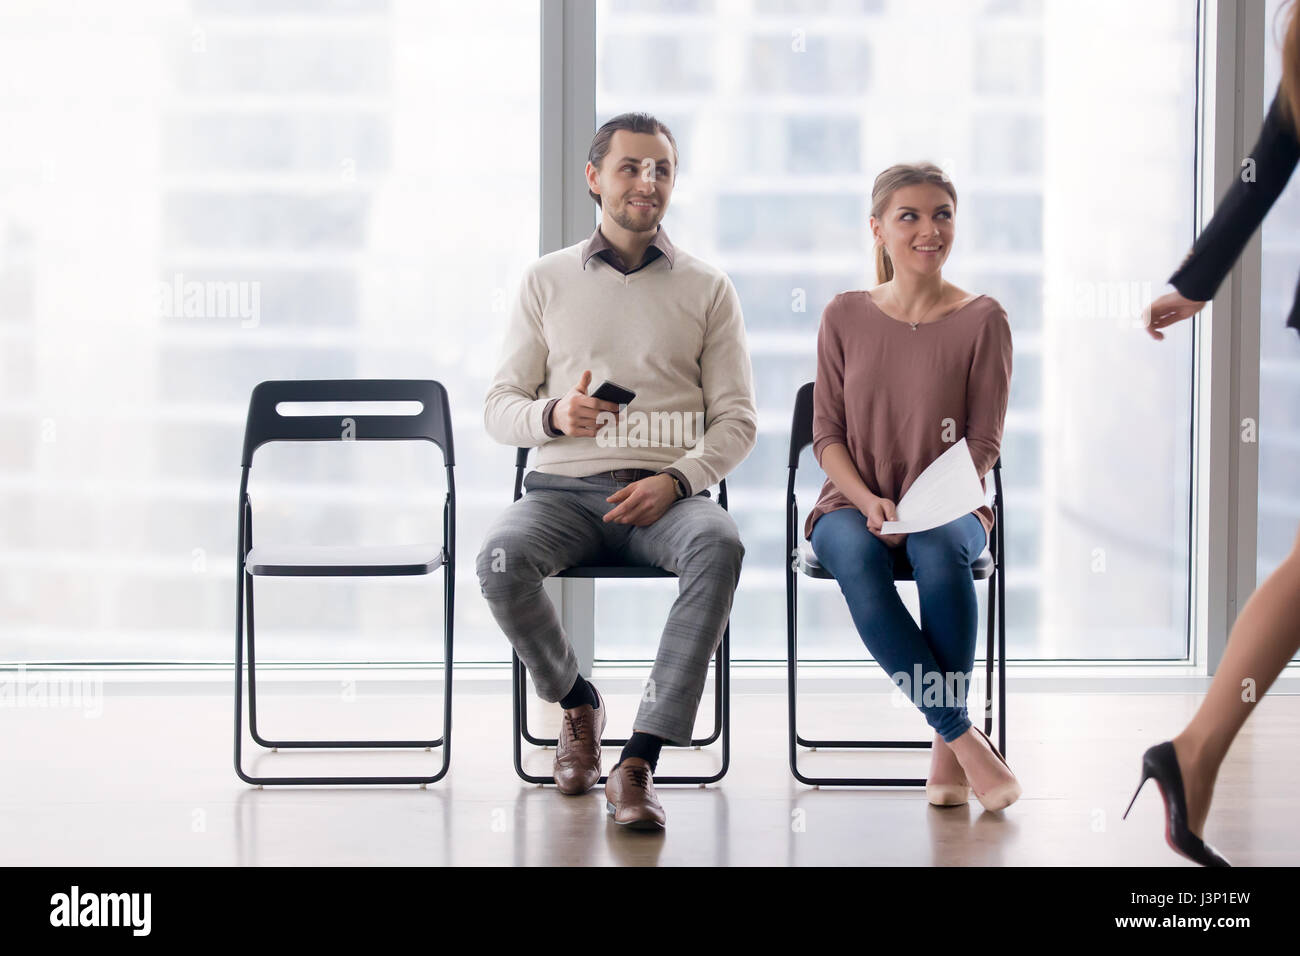 Colleagues or job applicants gazing at female coworker, fake fri Stock Photo